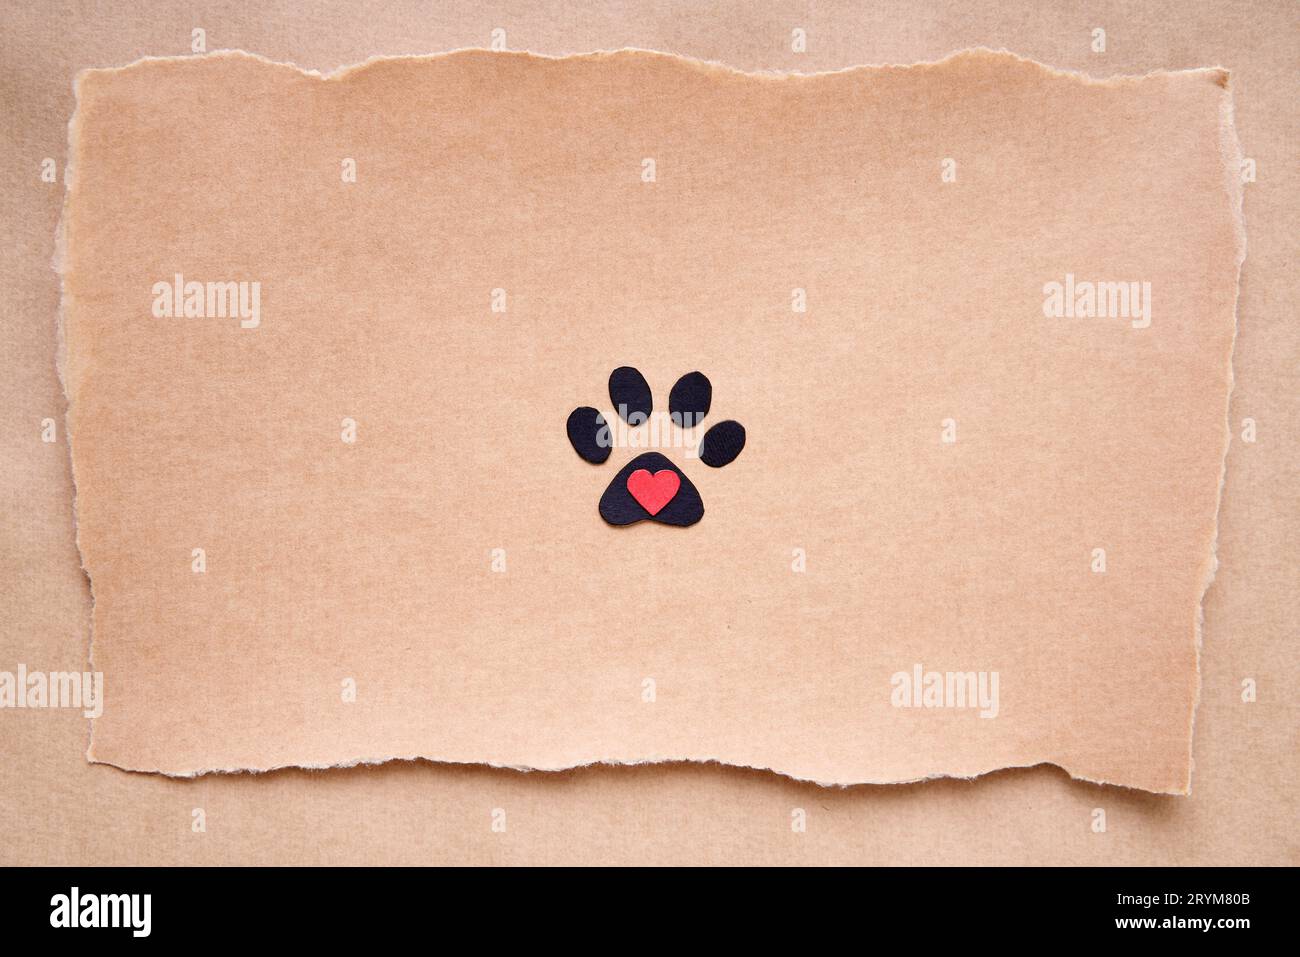 Postcard with paw print icon and heart, paper art style. Animal love concept, greeting card, invitation mockup Stock Photo